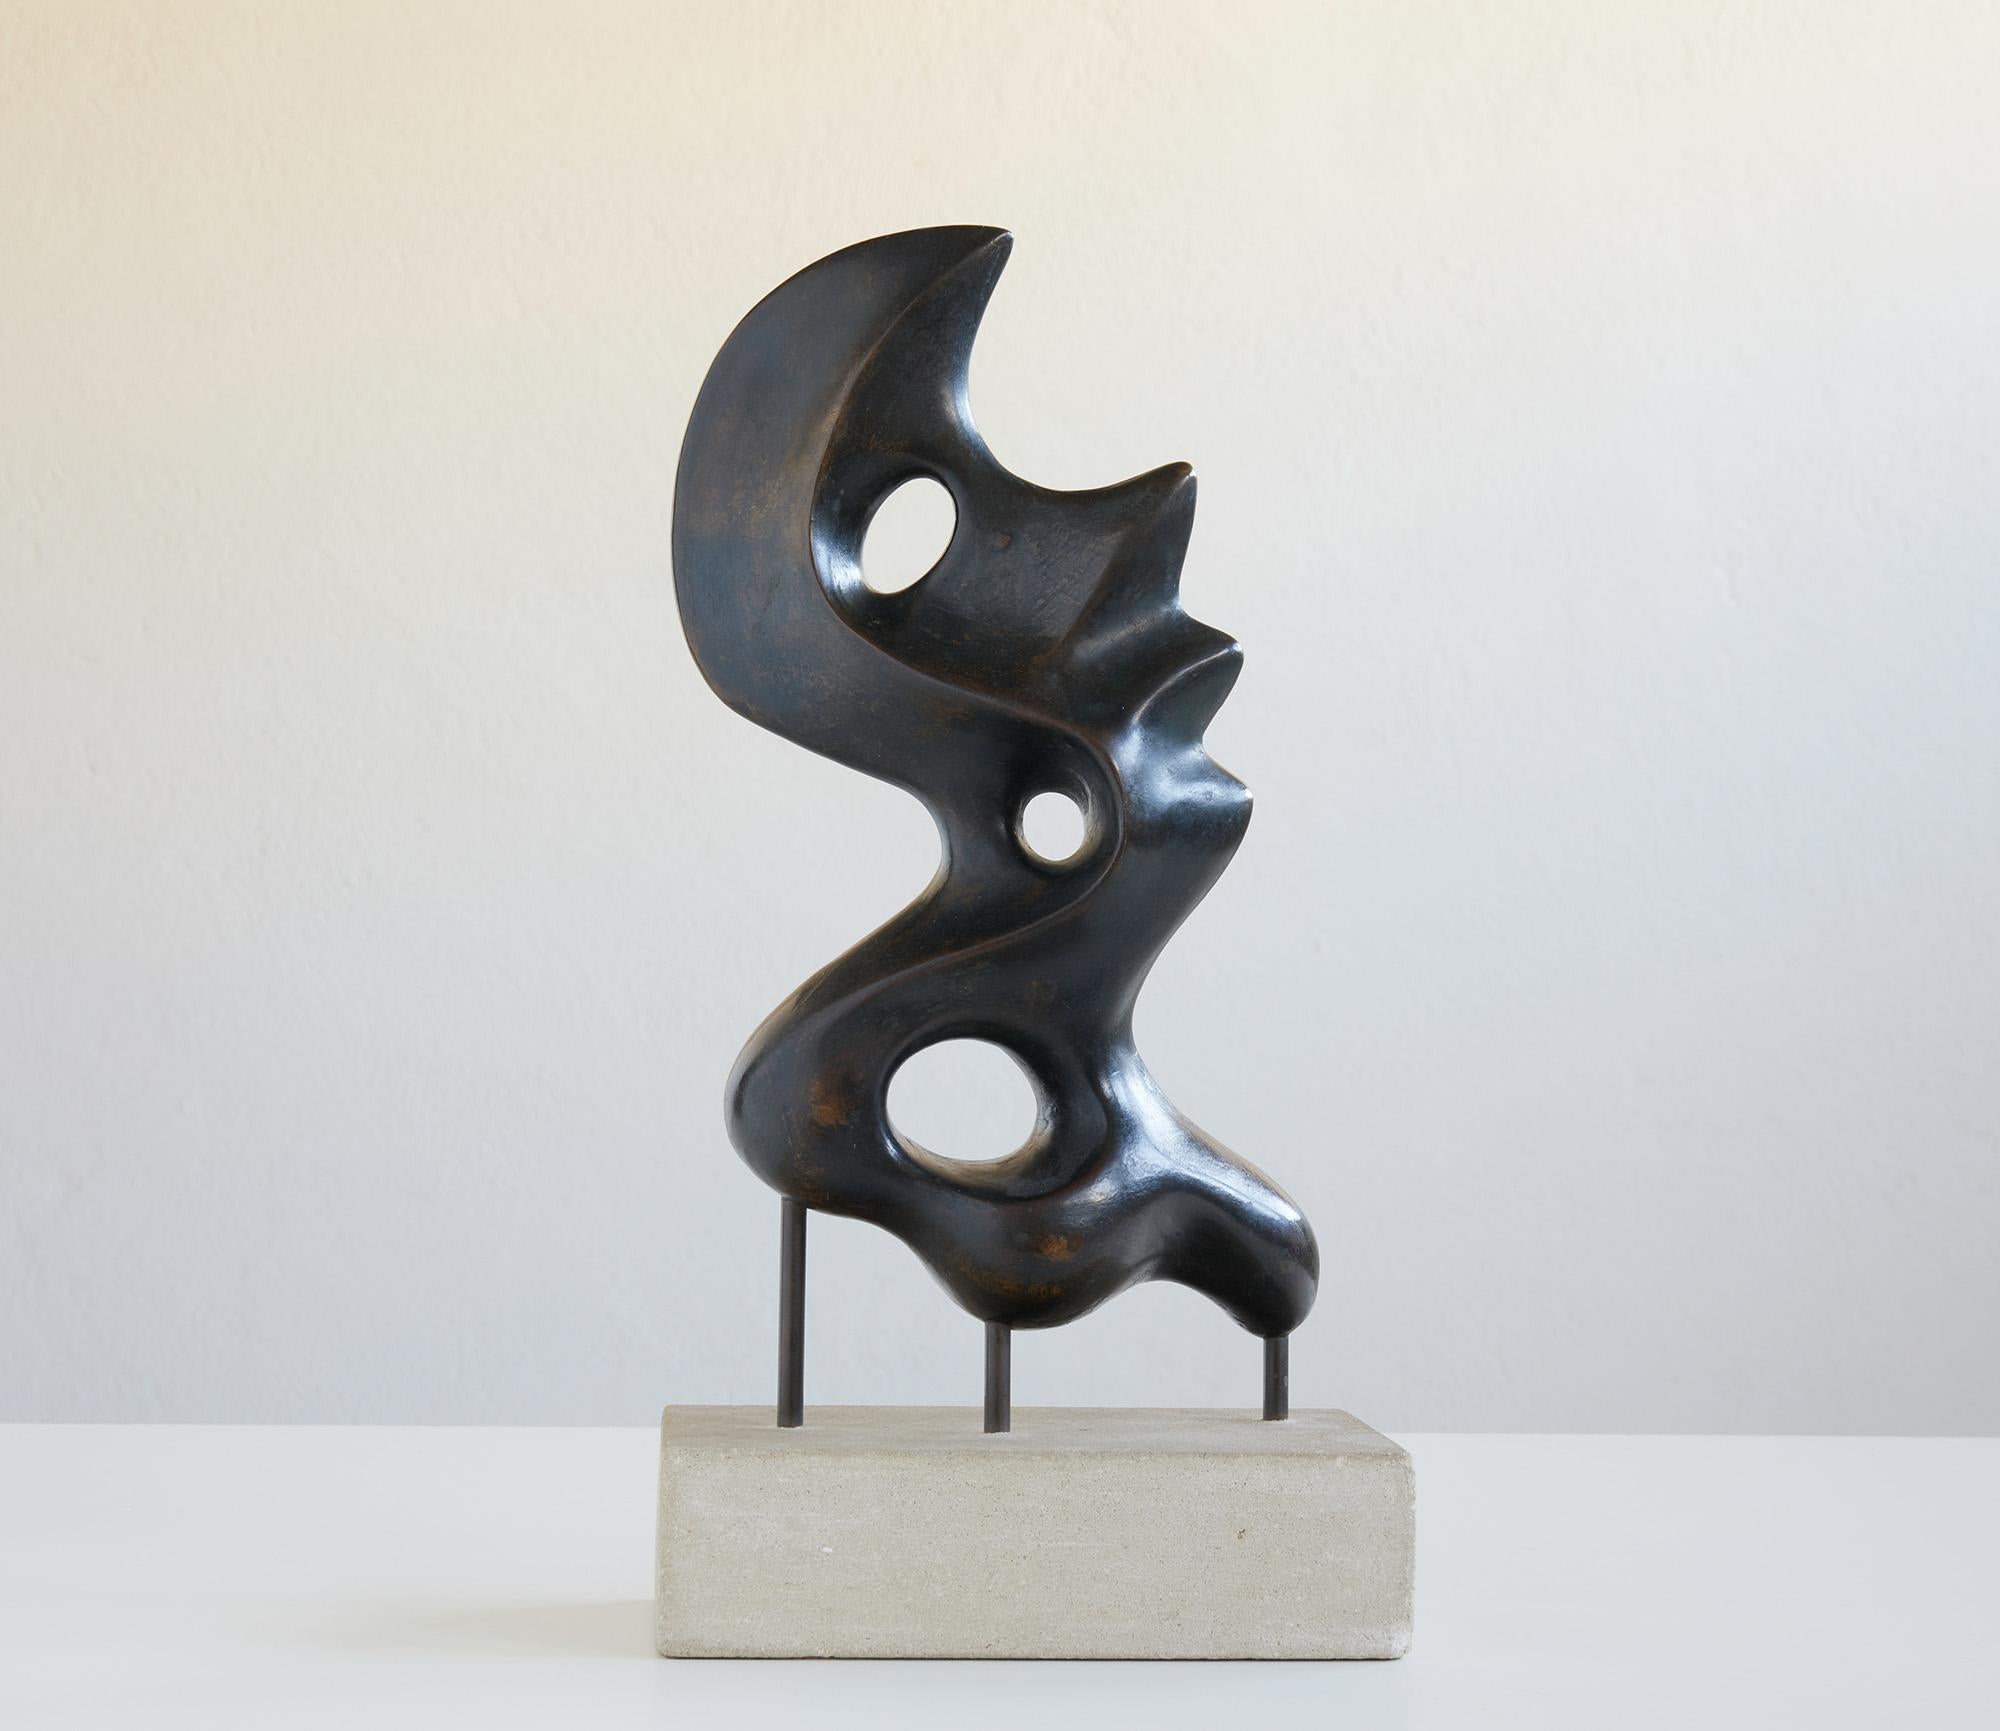 Beautiful abstract bronze sculpture in the style of Hans Arp 1886-1967

Signed E.Stöcklin and dated 64.

